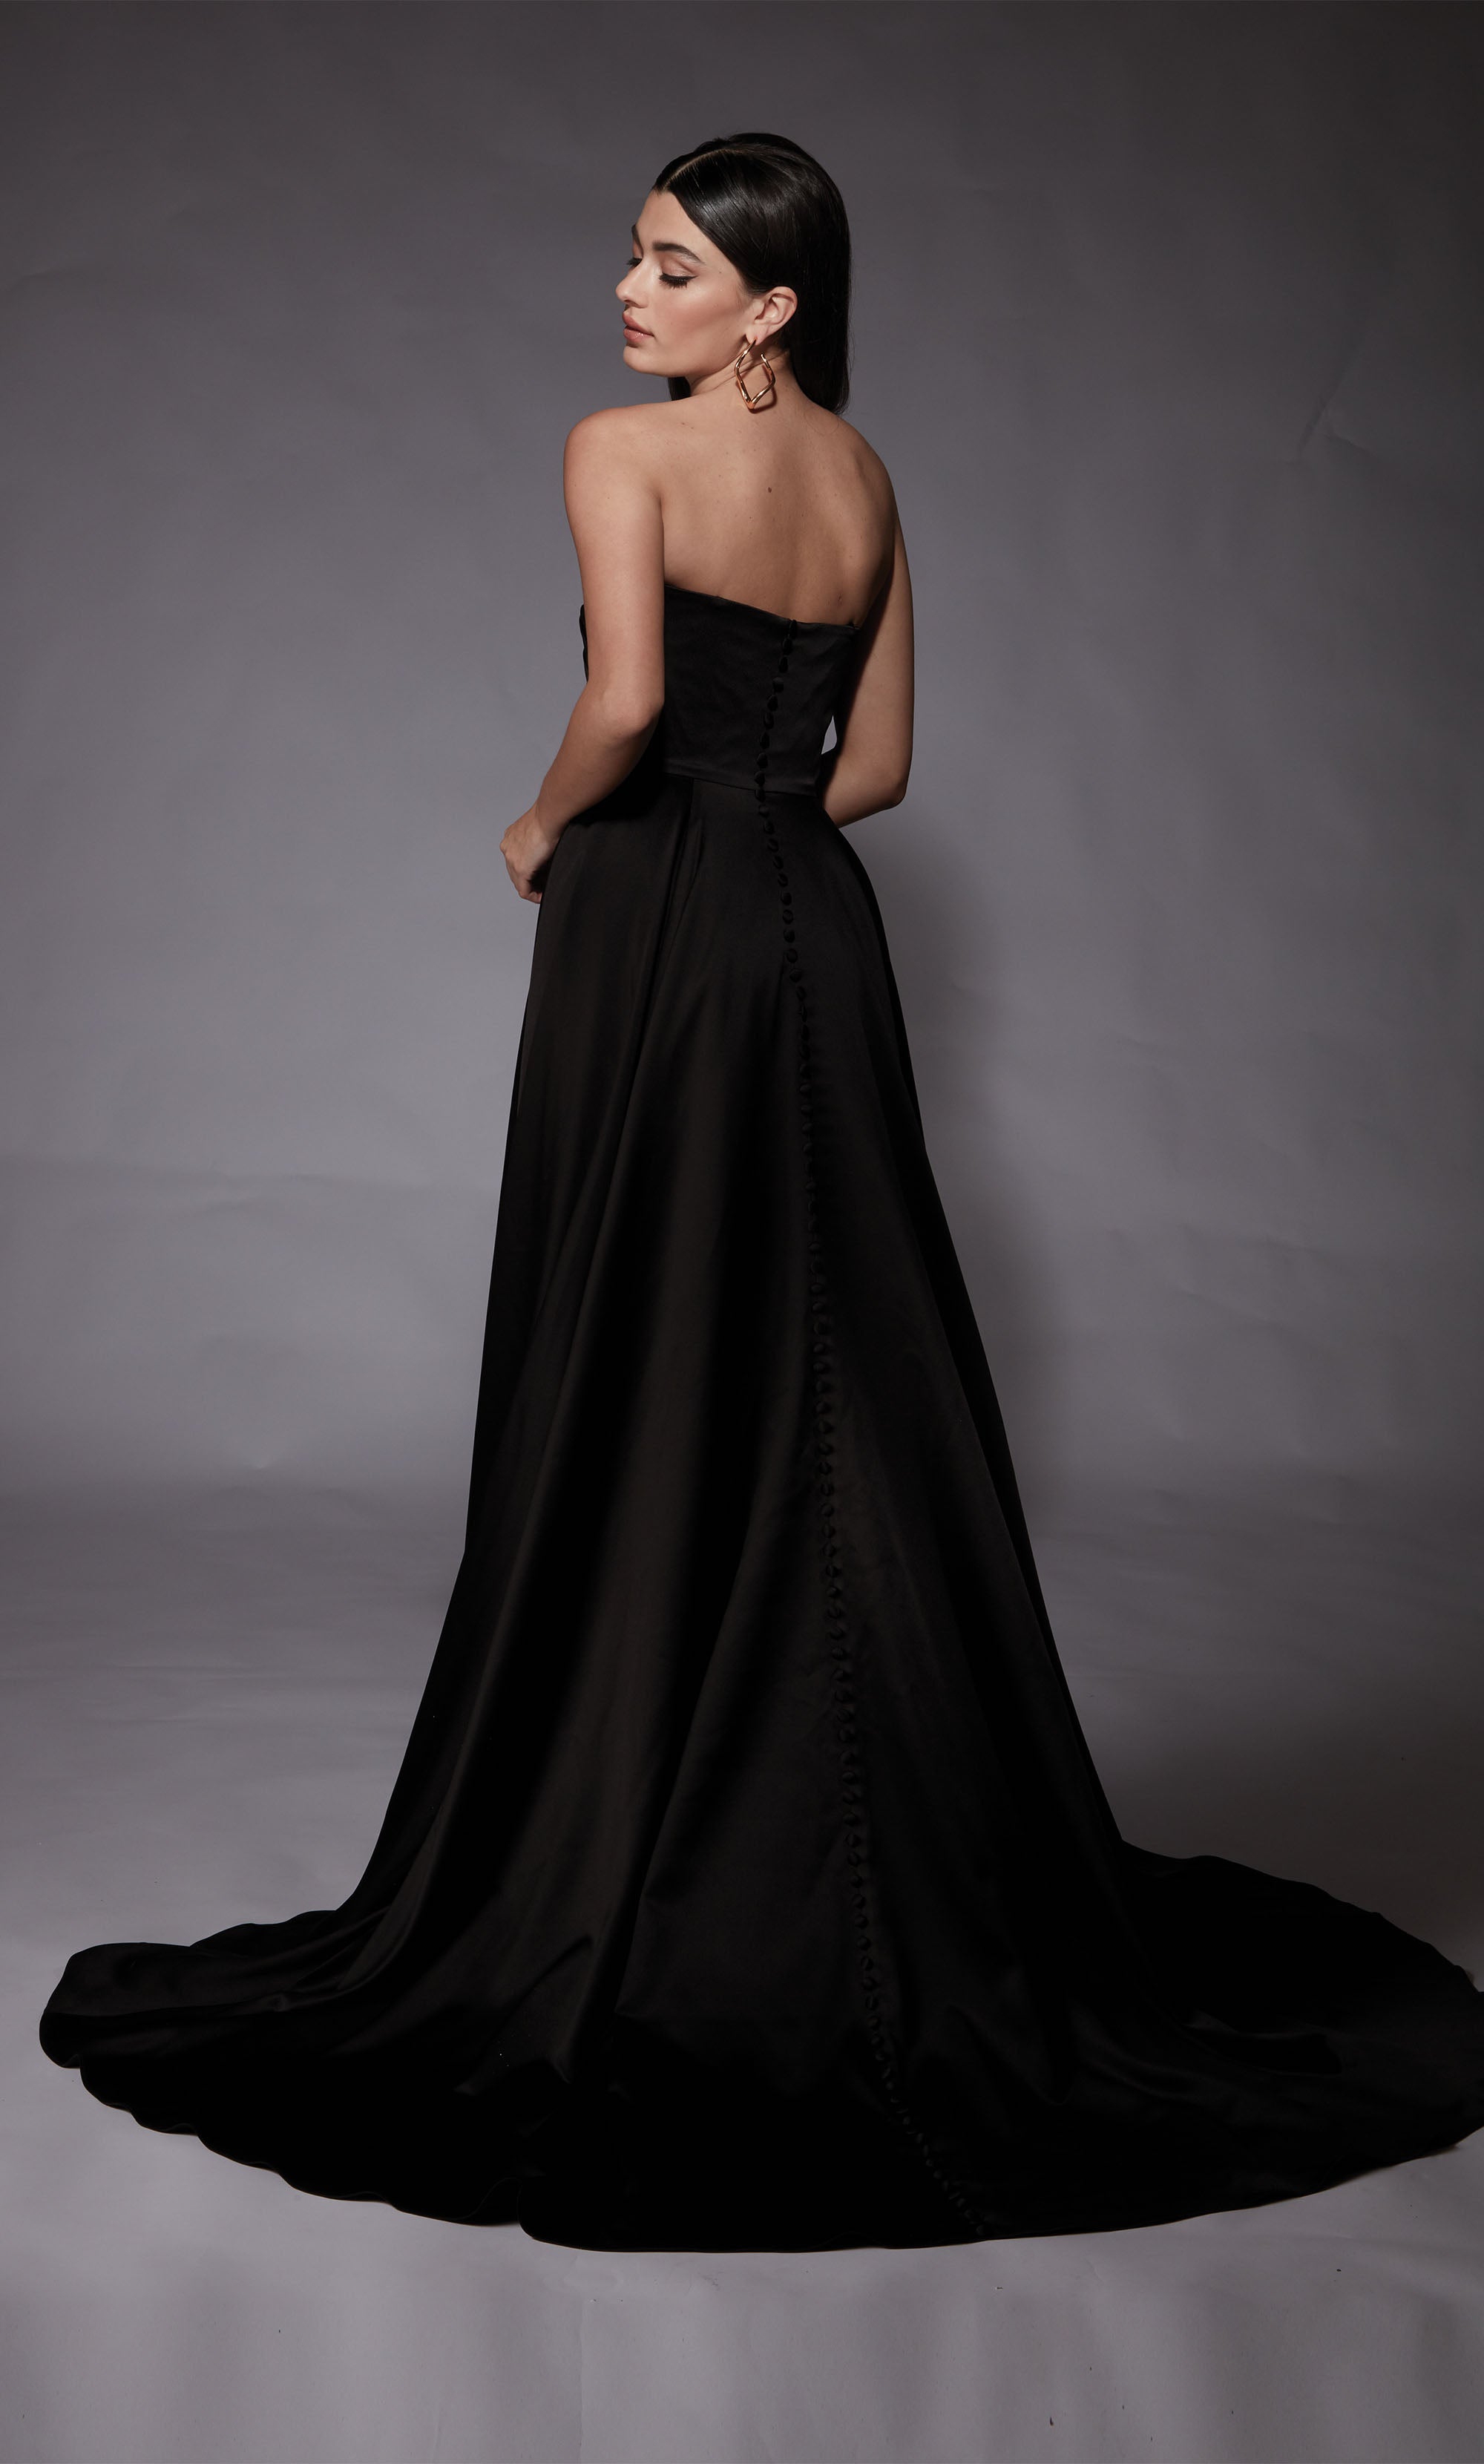 A-line satin bridal gown featuring a strapless, semi-sweetheart neckline, a pleated bodice, and high side slit in the color Black.